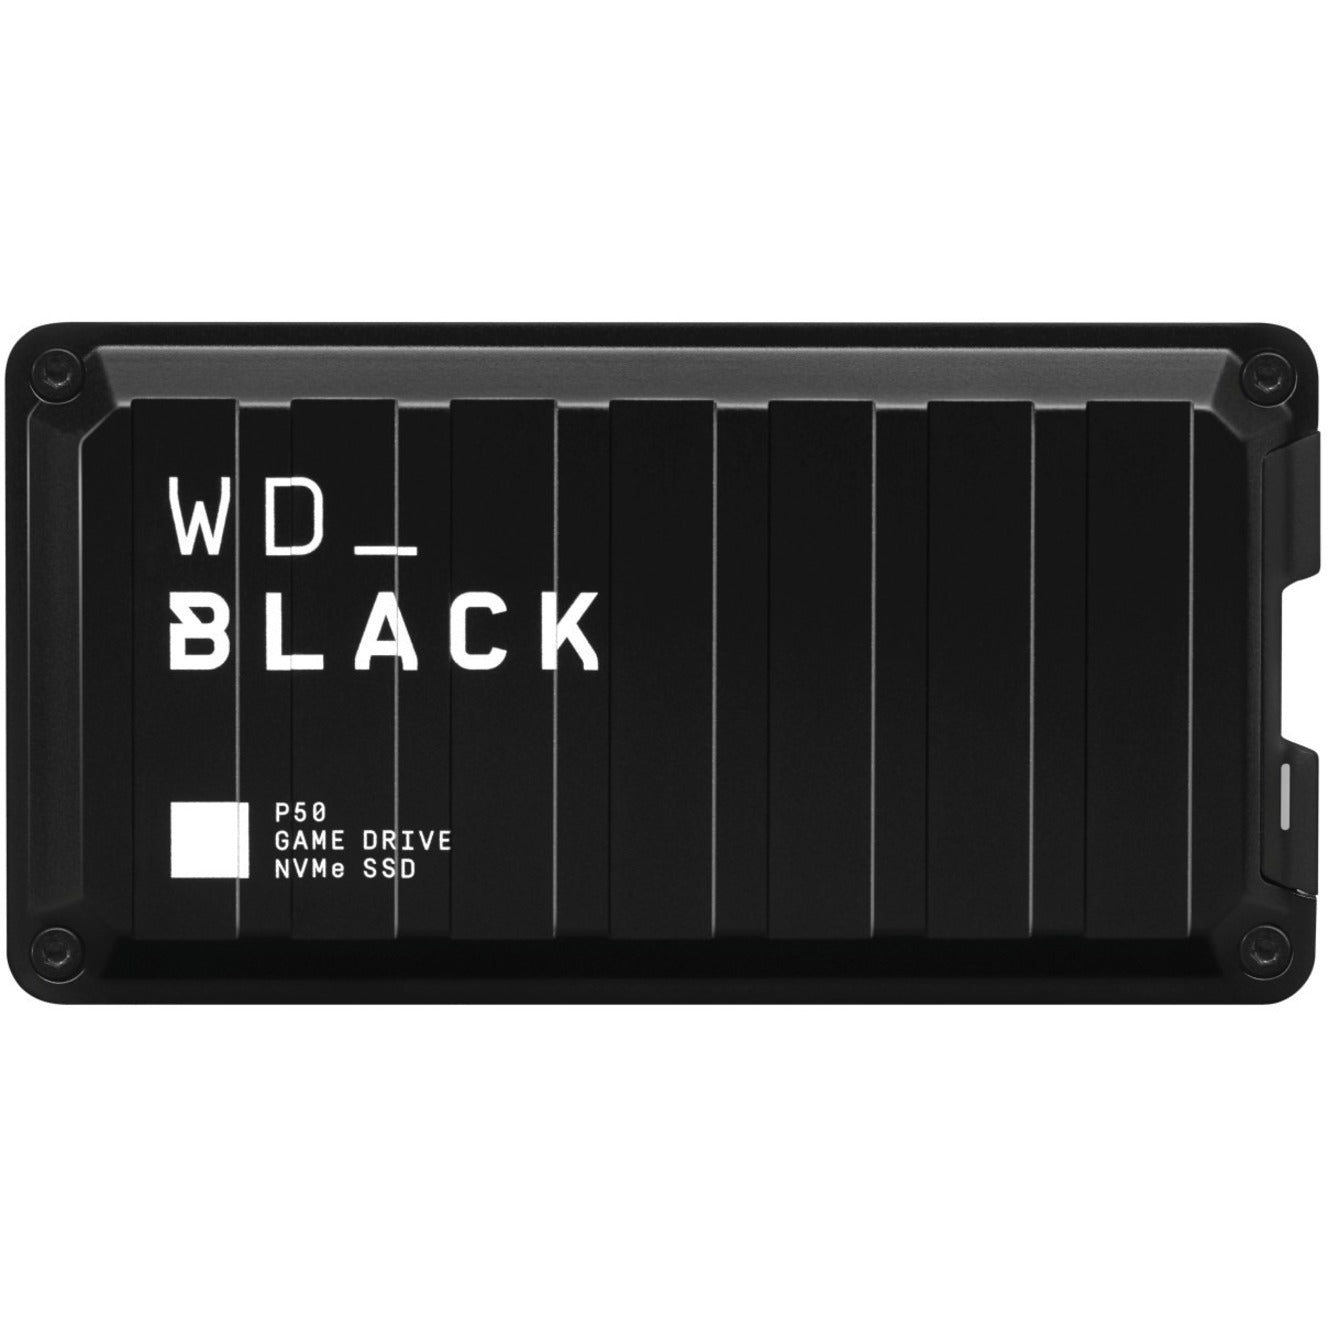 WD WDBA3S0020BBK-WESN BLACK P50 Game Drive SSD, 2TB Portable Solid State Drive - External